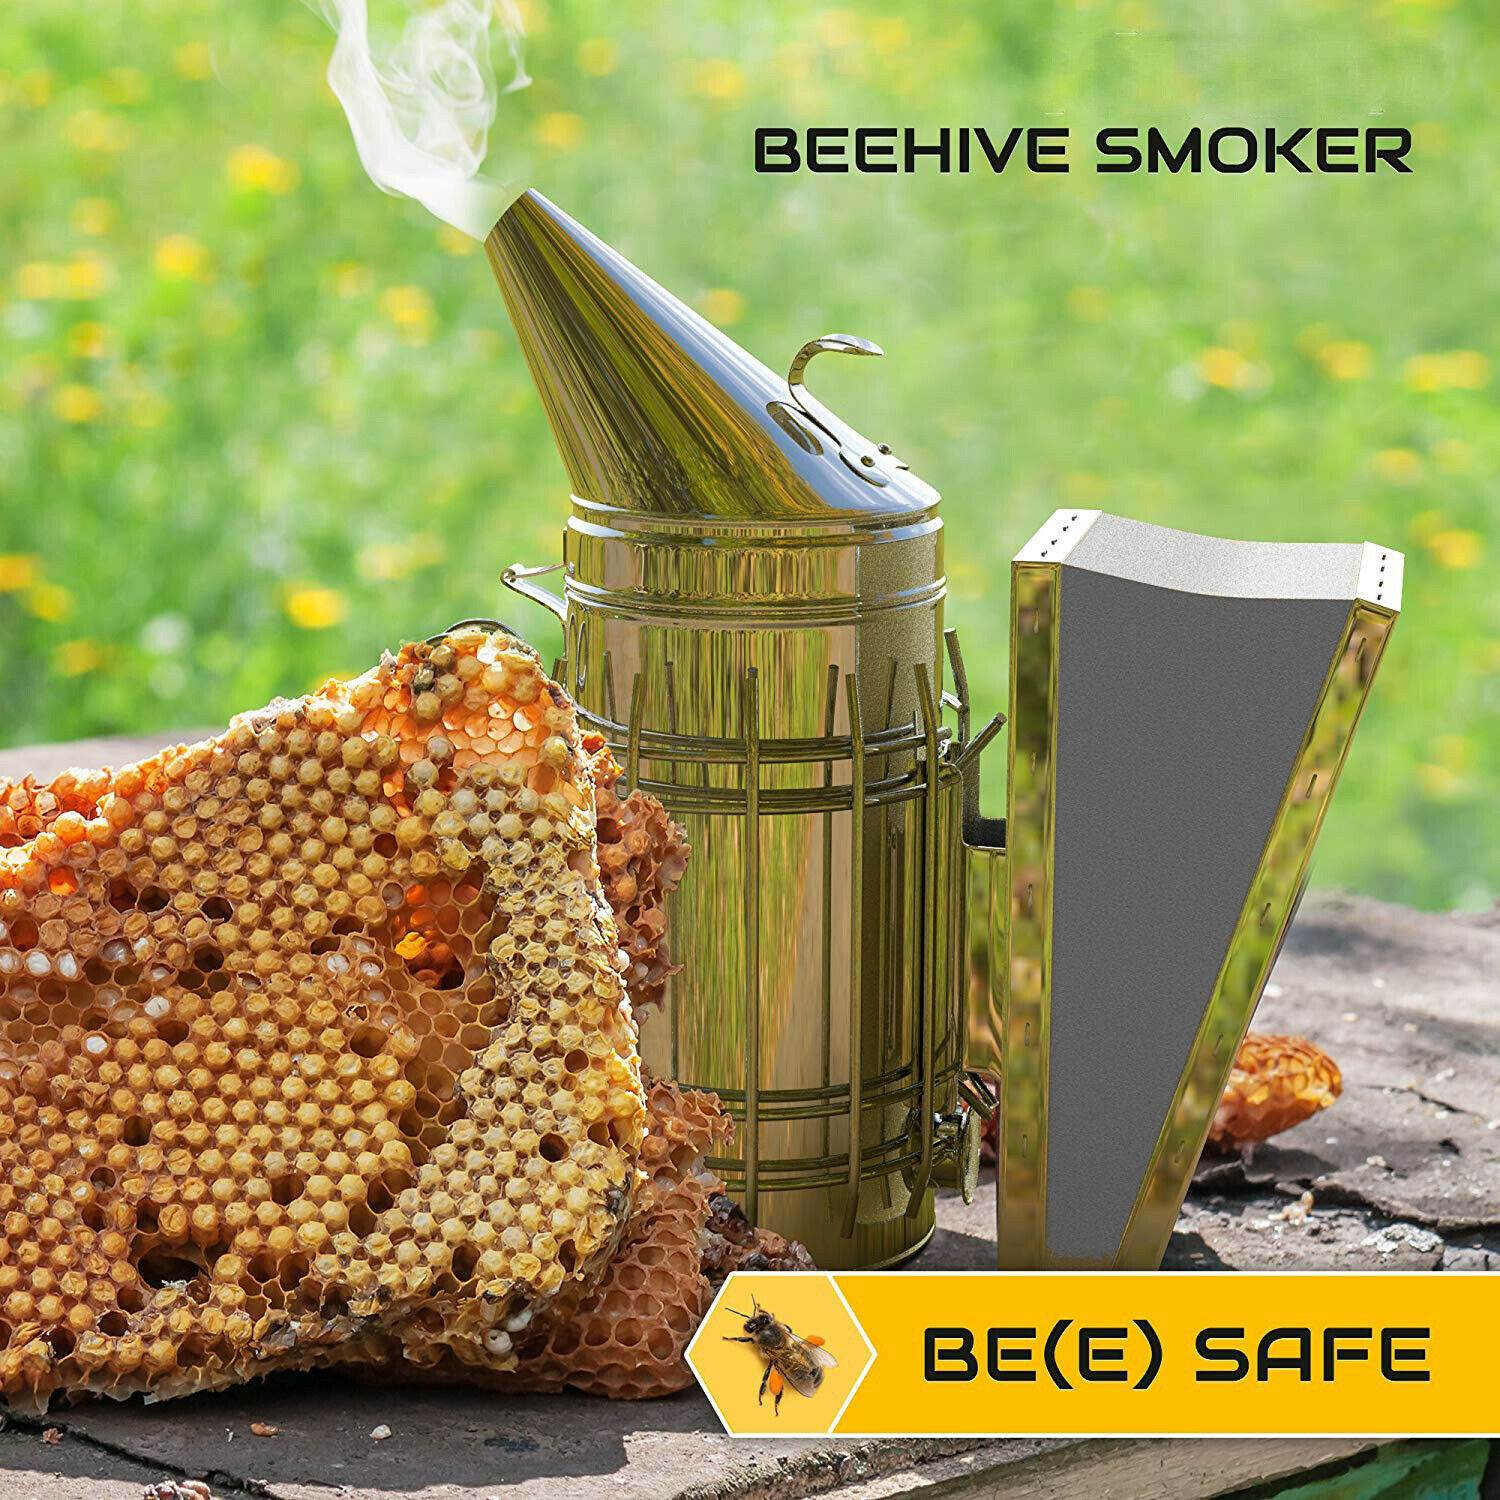 Details about   Bee Hive Smoker Stainless Steel w/ Heat Shield Calming Beekeeping Equipment 